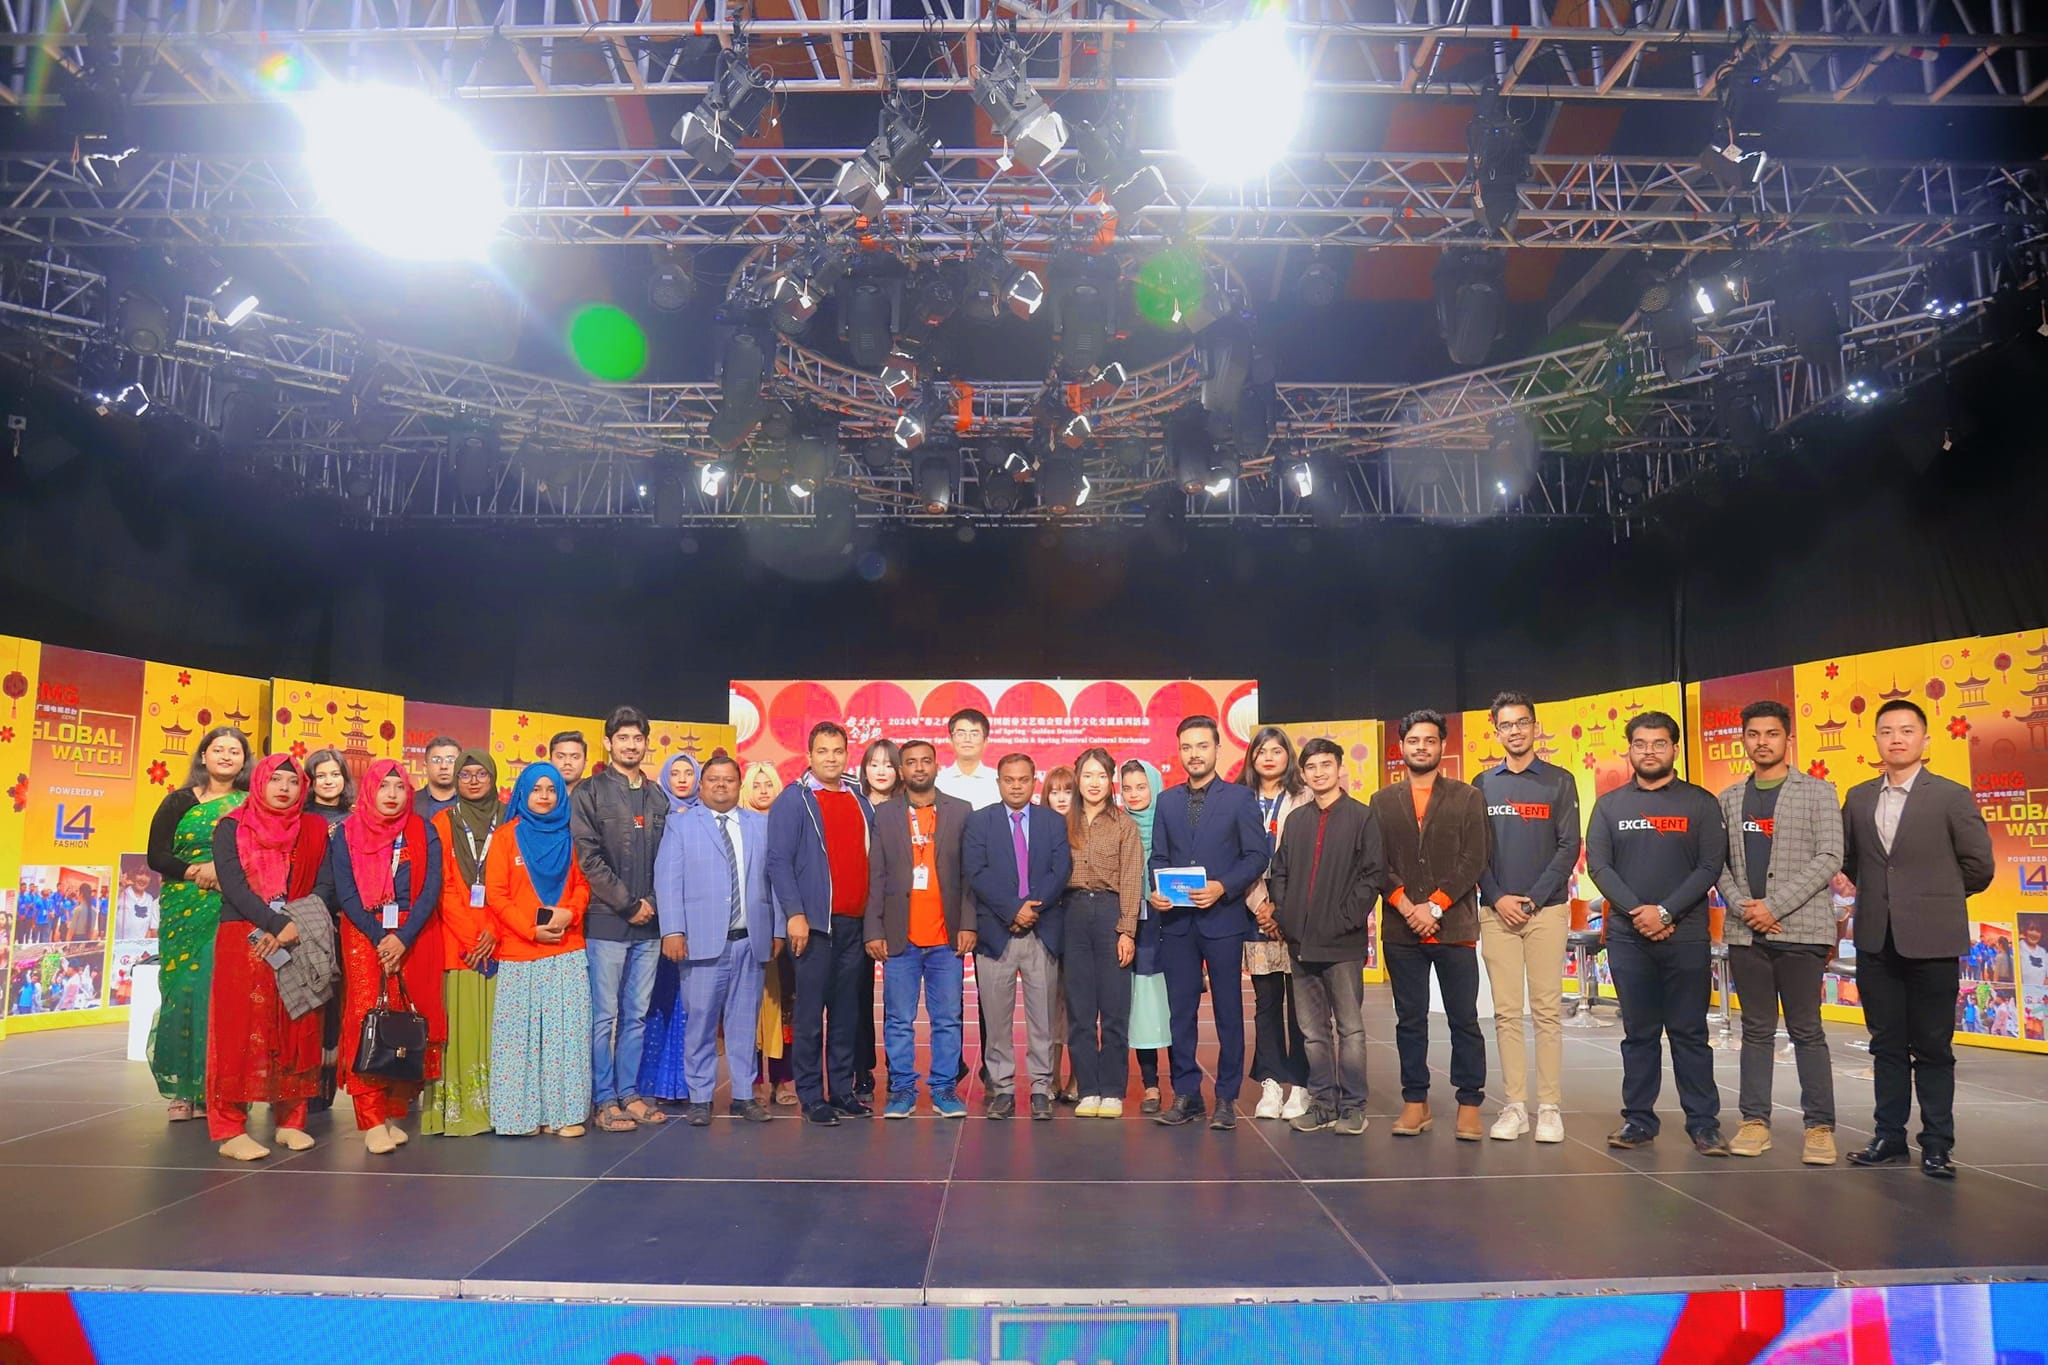 The Students of Asian University of Bangladesh with the Students of China's Yunnan University in a TV Program "Global Watch" Organized by Popular Satellite Channel RTV. Topic: Exchange of Education and Culture between China and Bangladesh.